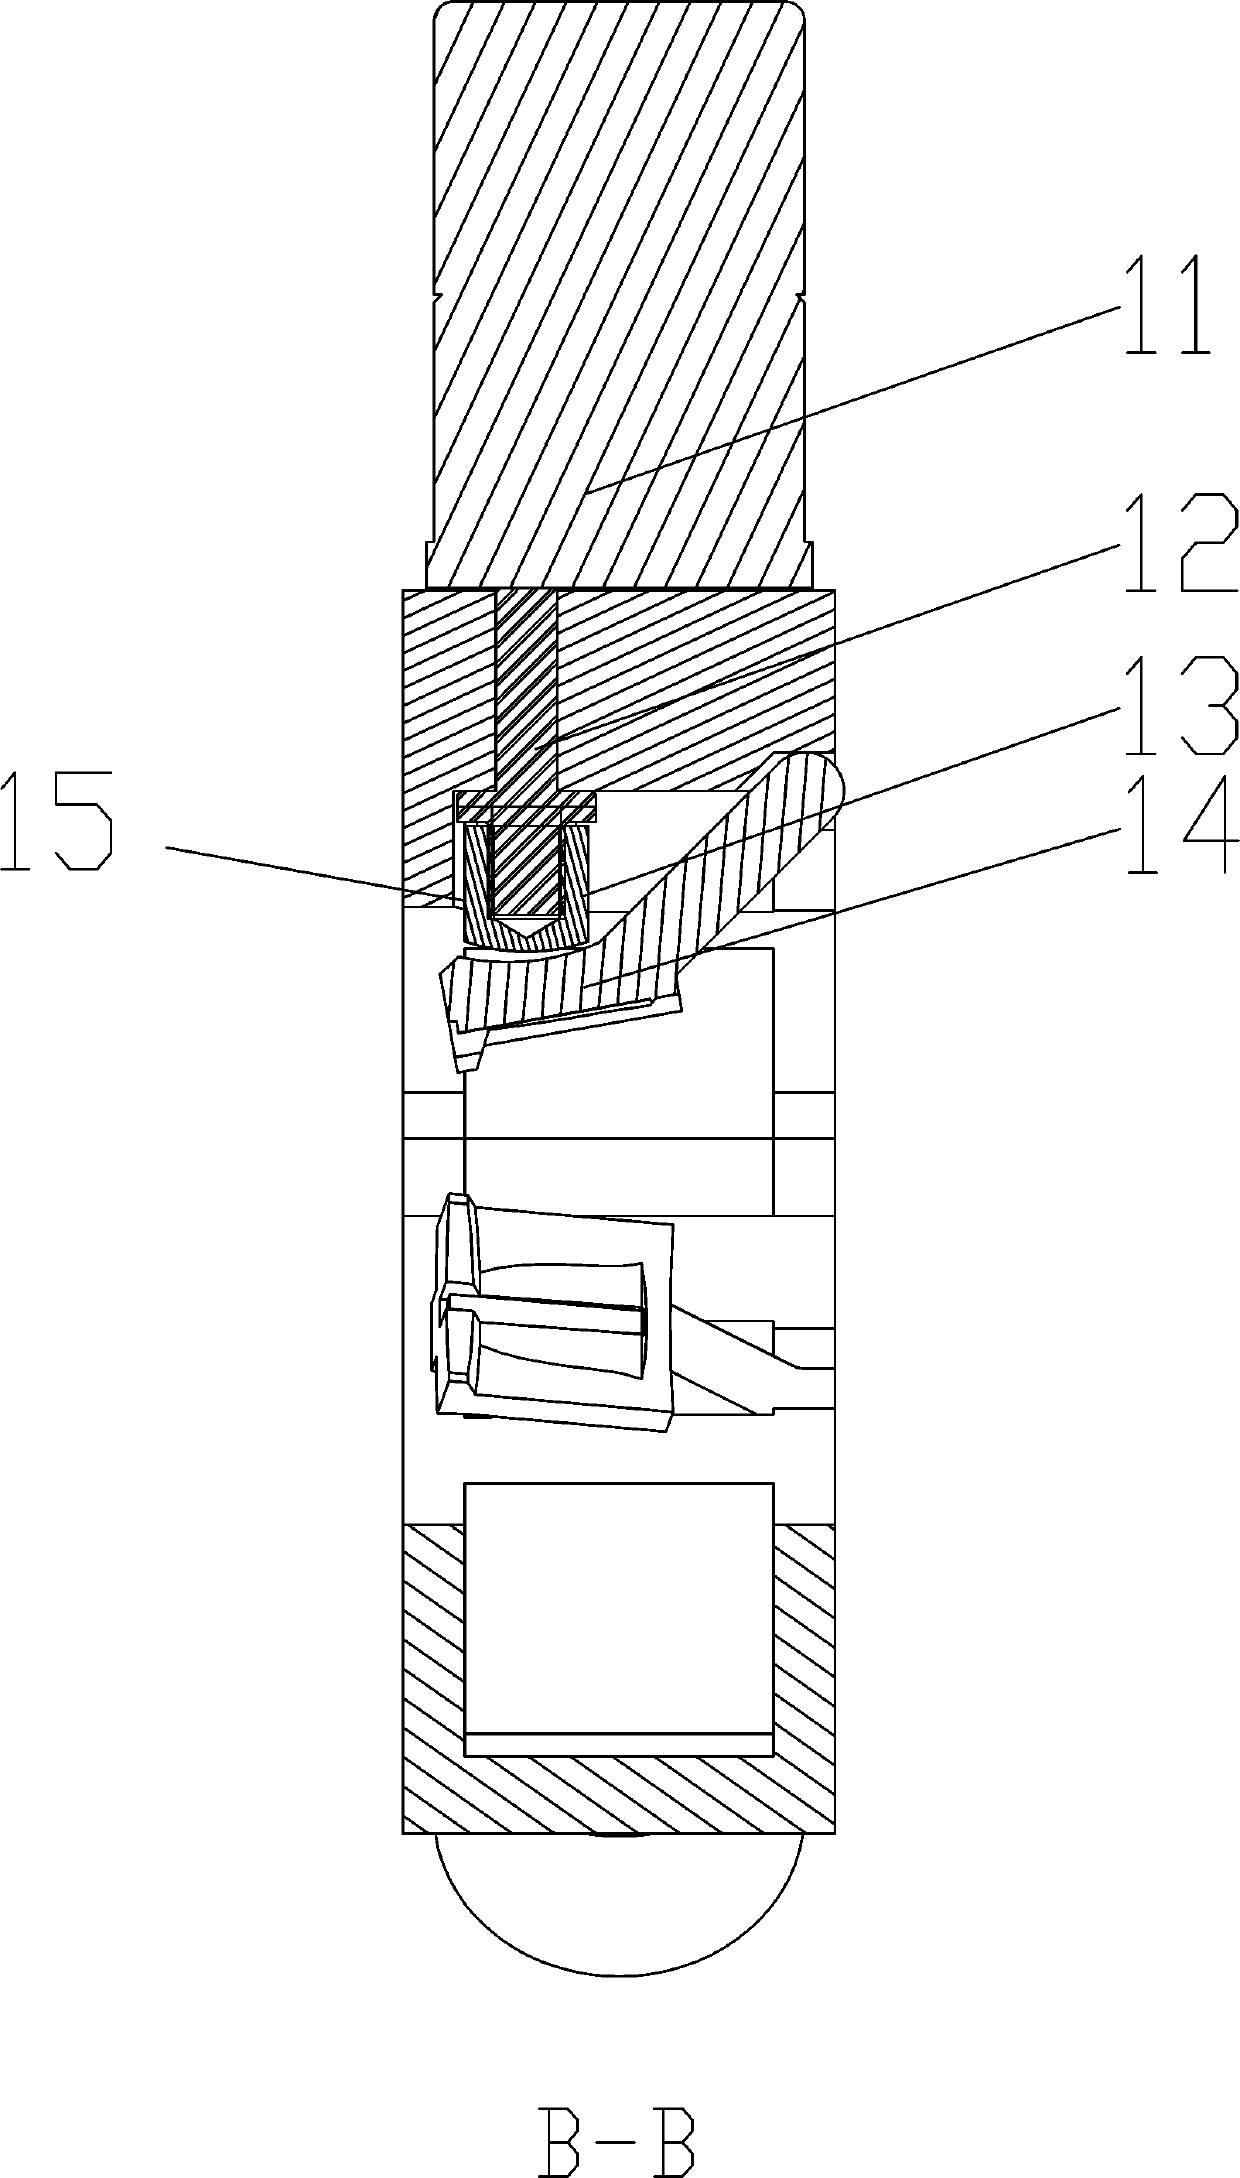 Insulator replacement device and method enabling chucks to be adjusted synchronously